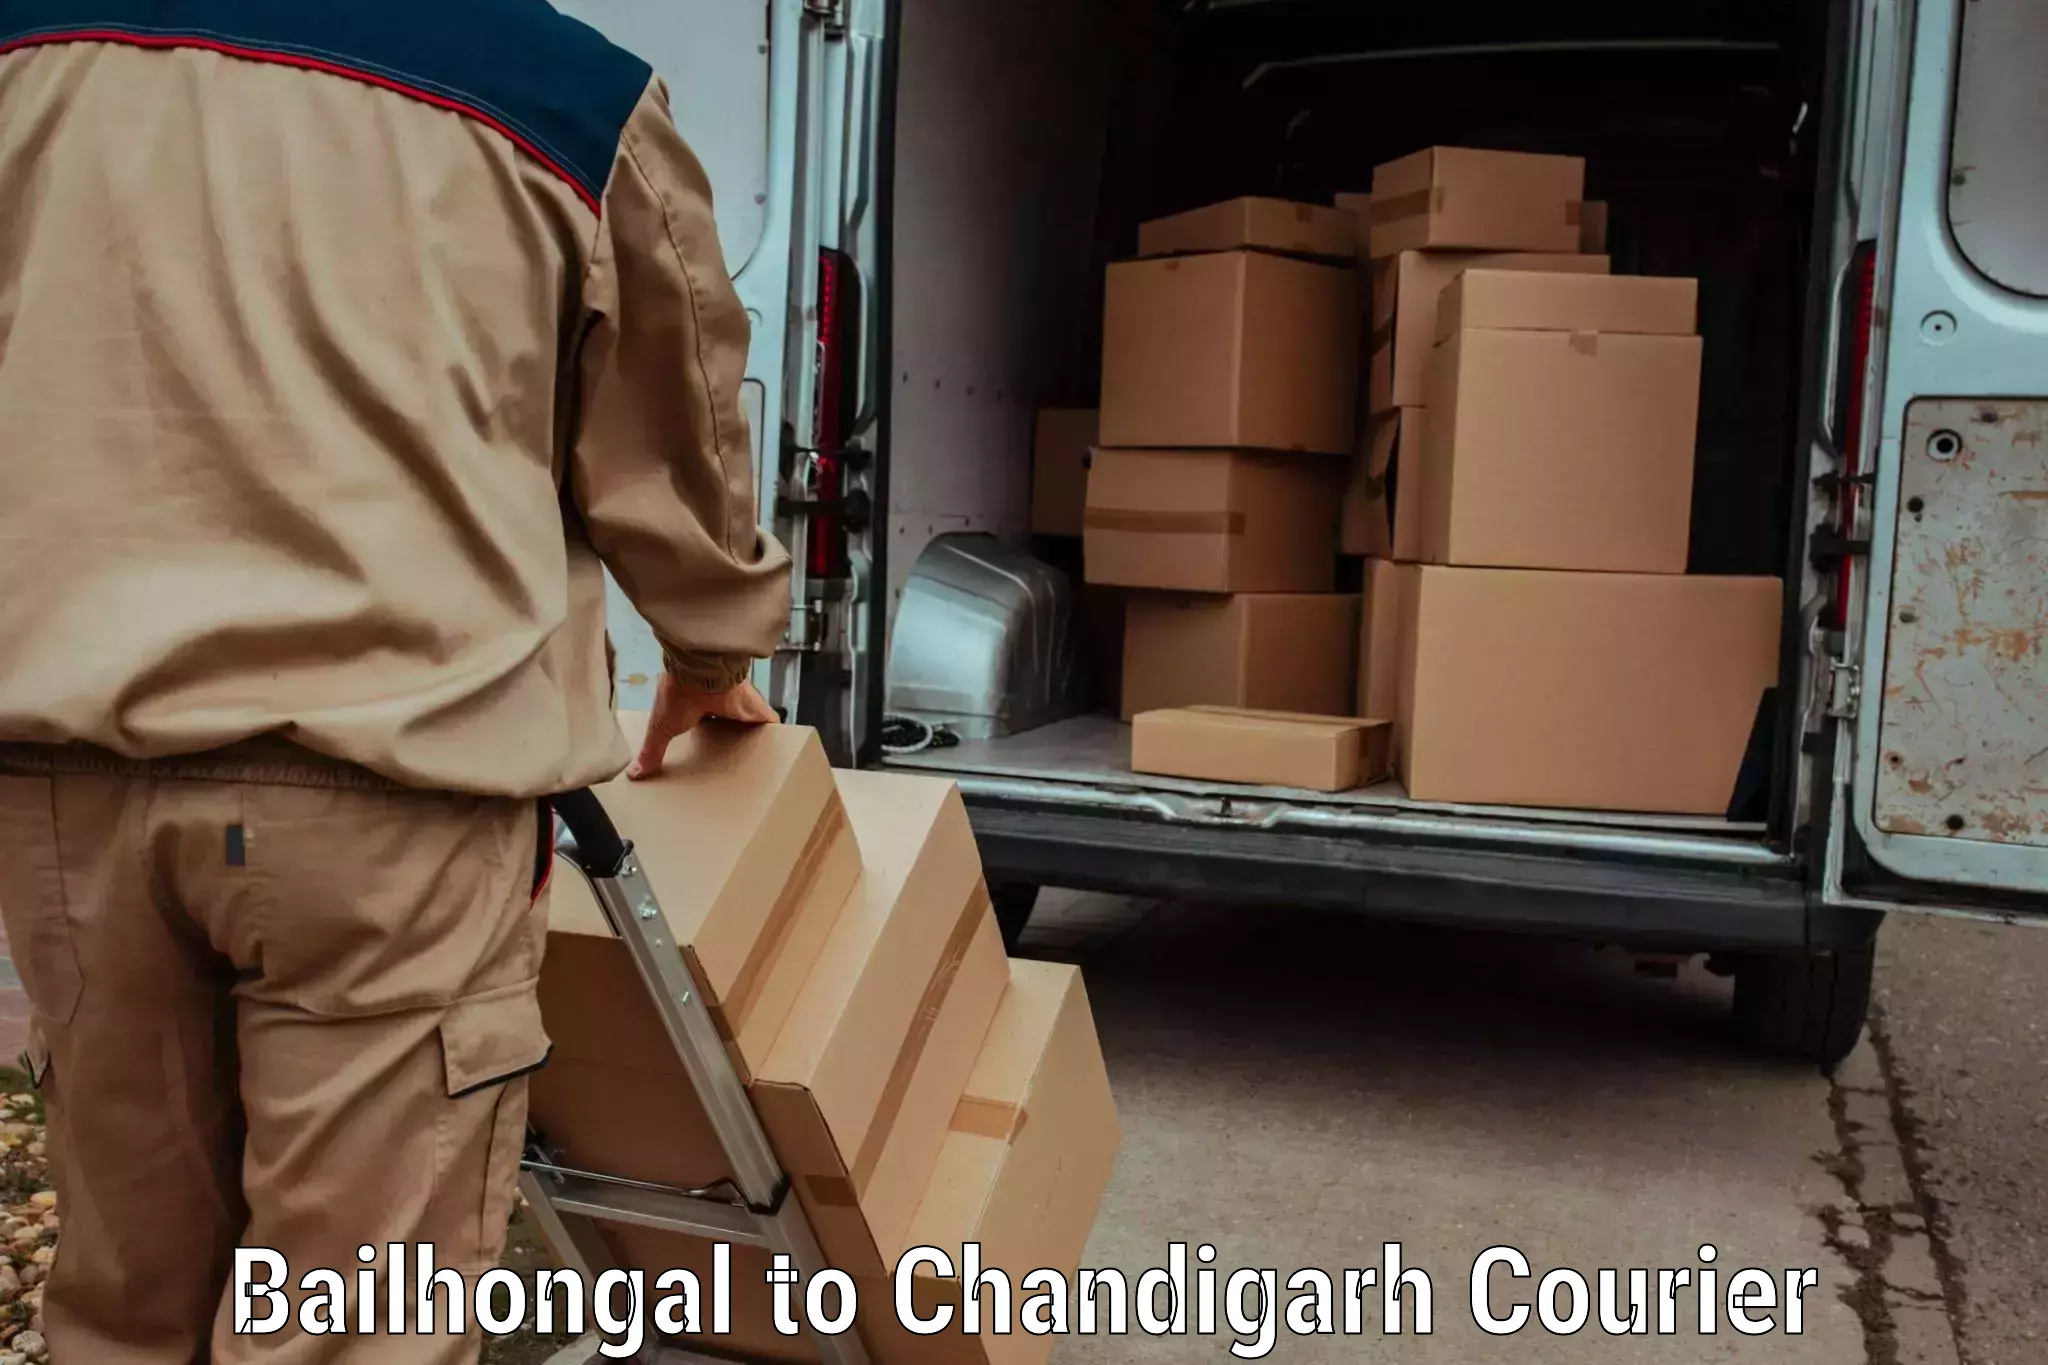 Local delivery service Bailhongal to Chandigarh